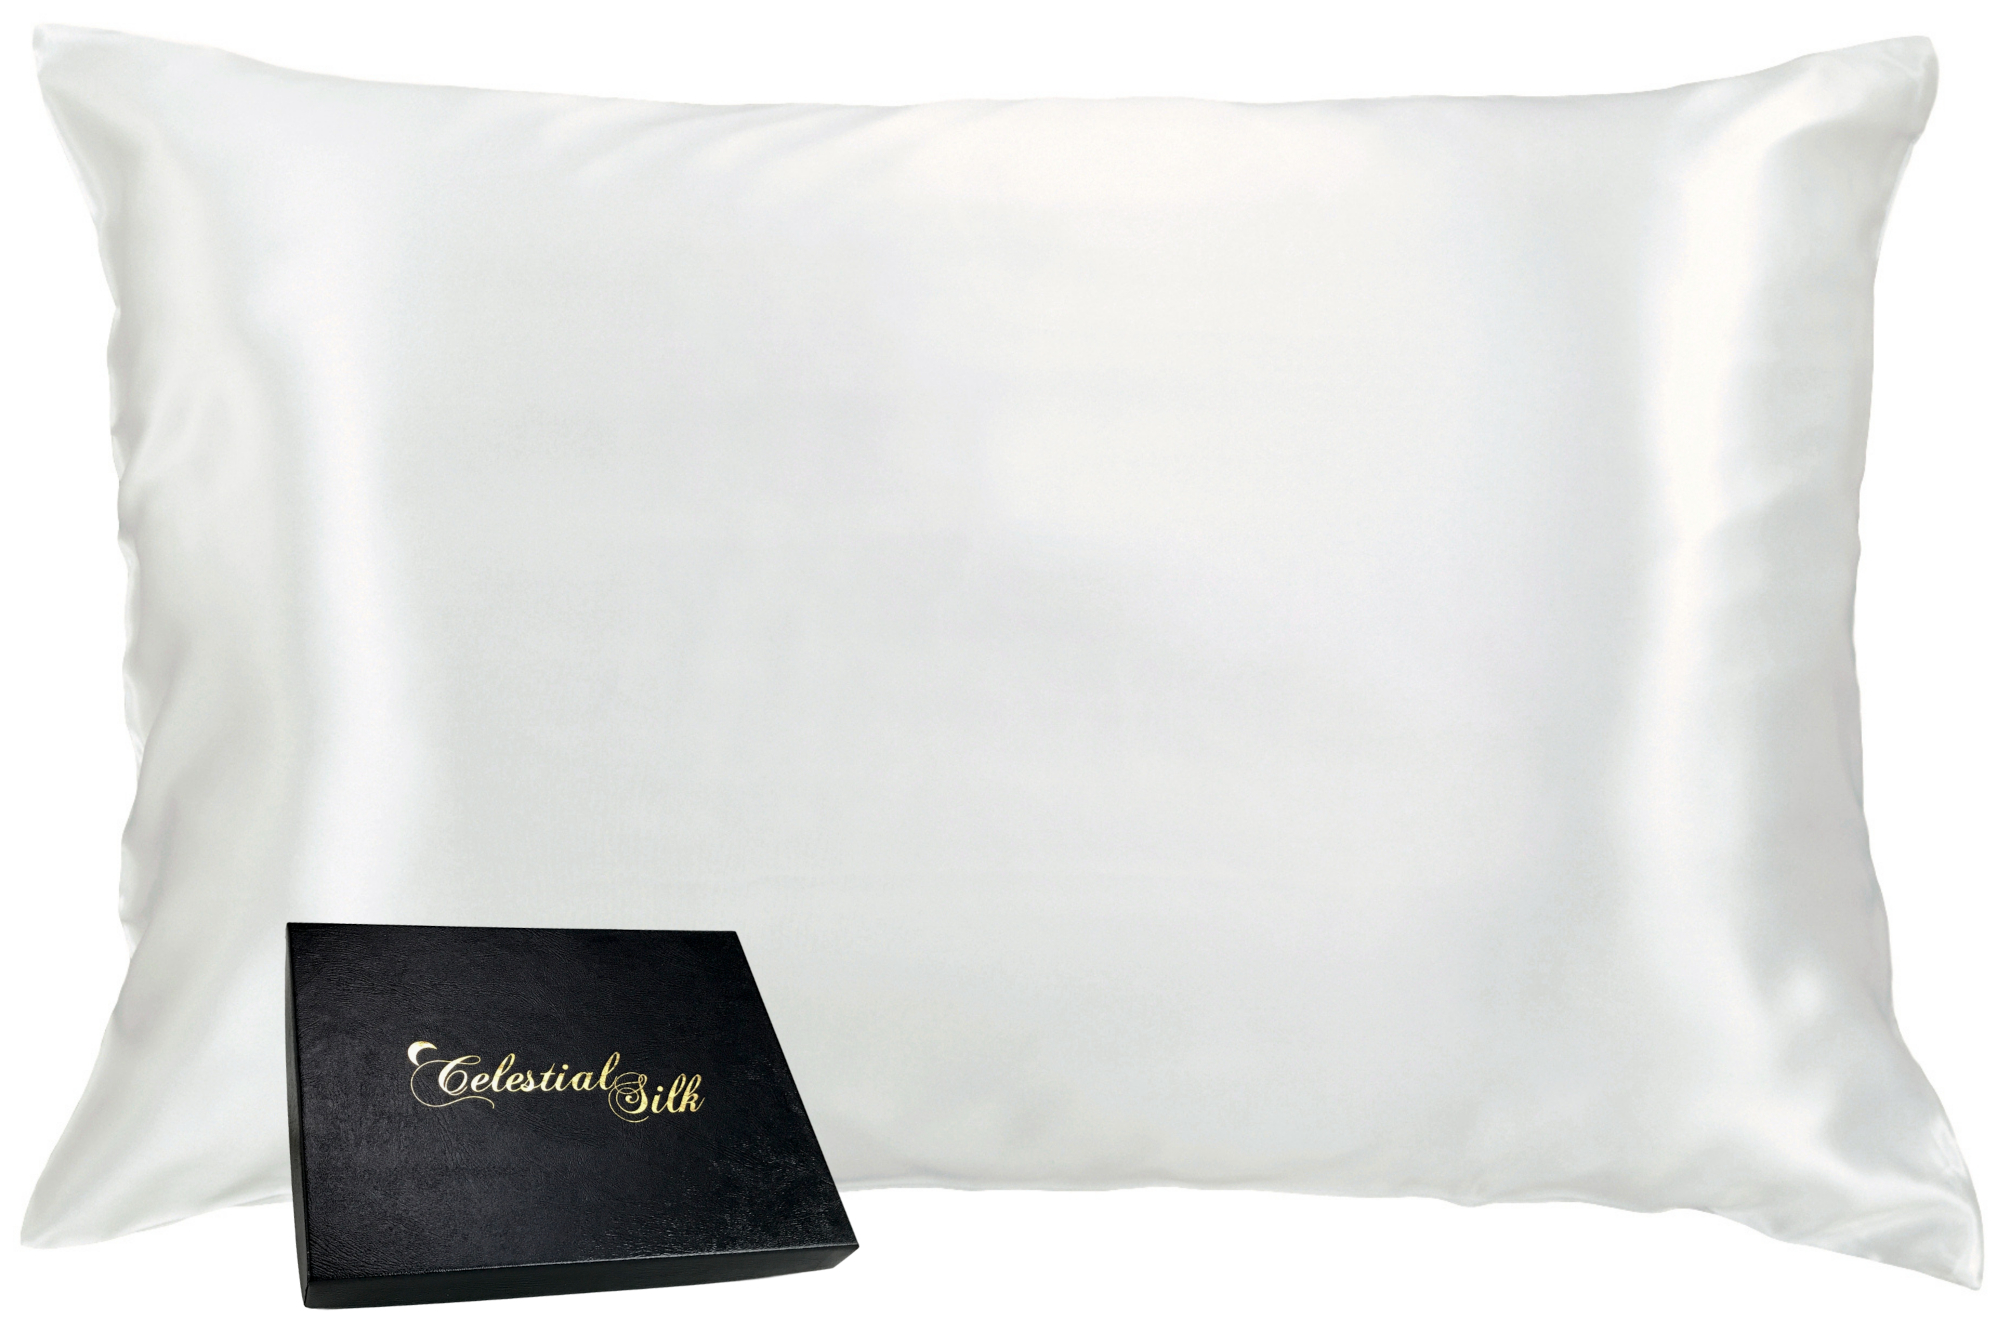 100% Silk Pillowcase for Hair Zippered Luxury 25 Momme Mulberry Silk Charmeuse Silk on Both Sides of Cover -Gift Wrapped- (King, White) - image 1 of 7